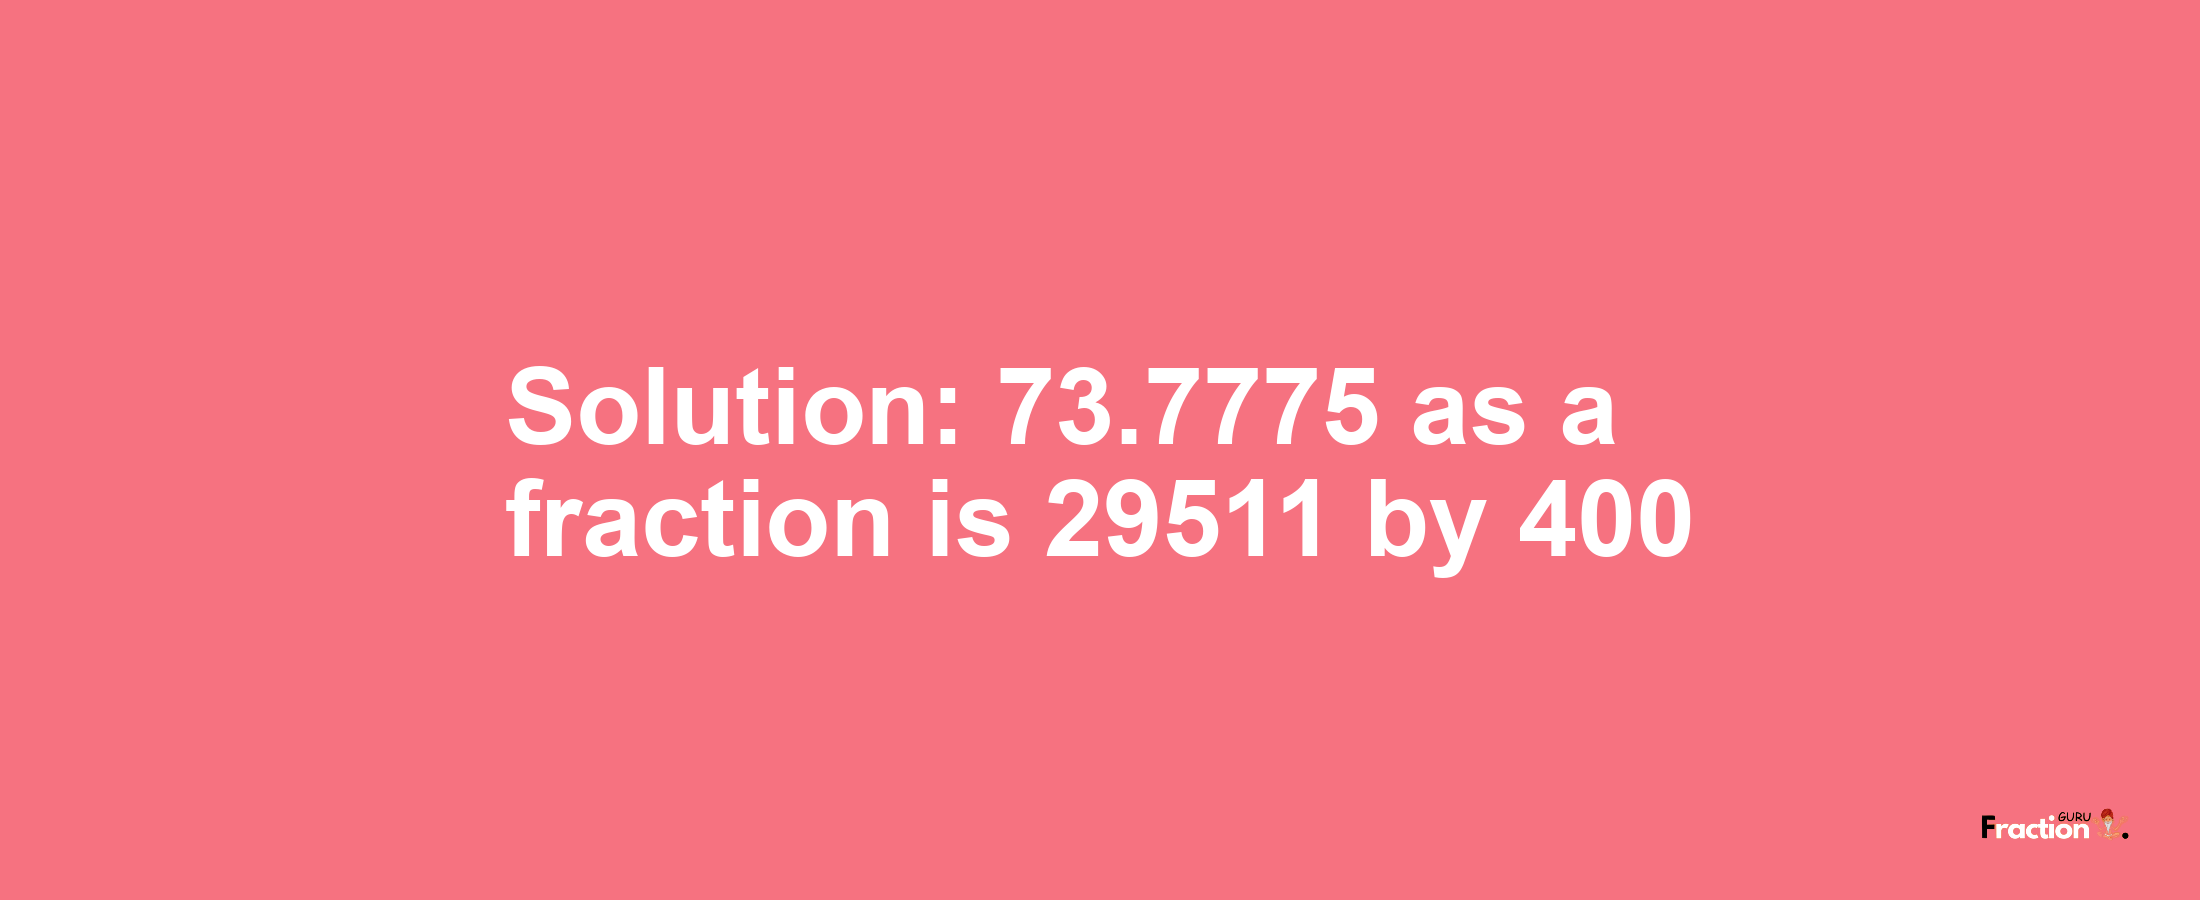 Solution:73.7775 as a fraction is 29511/400